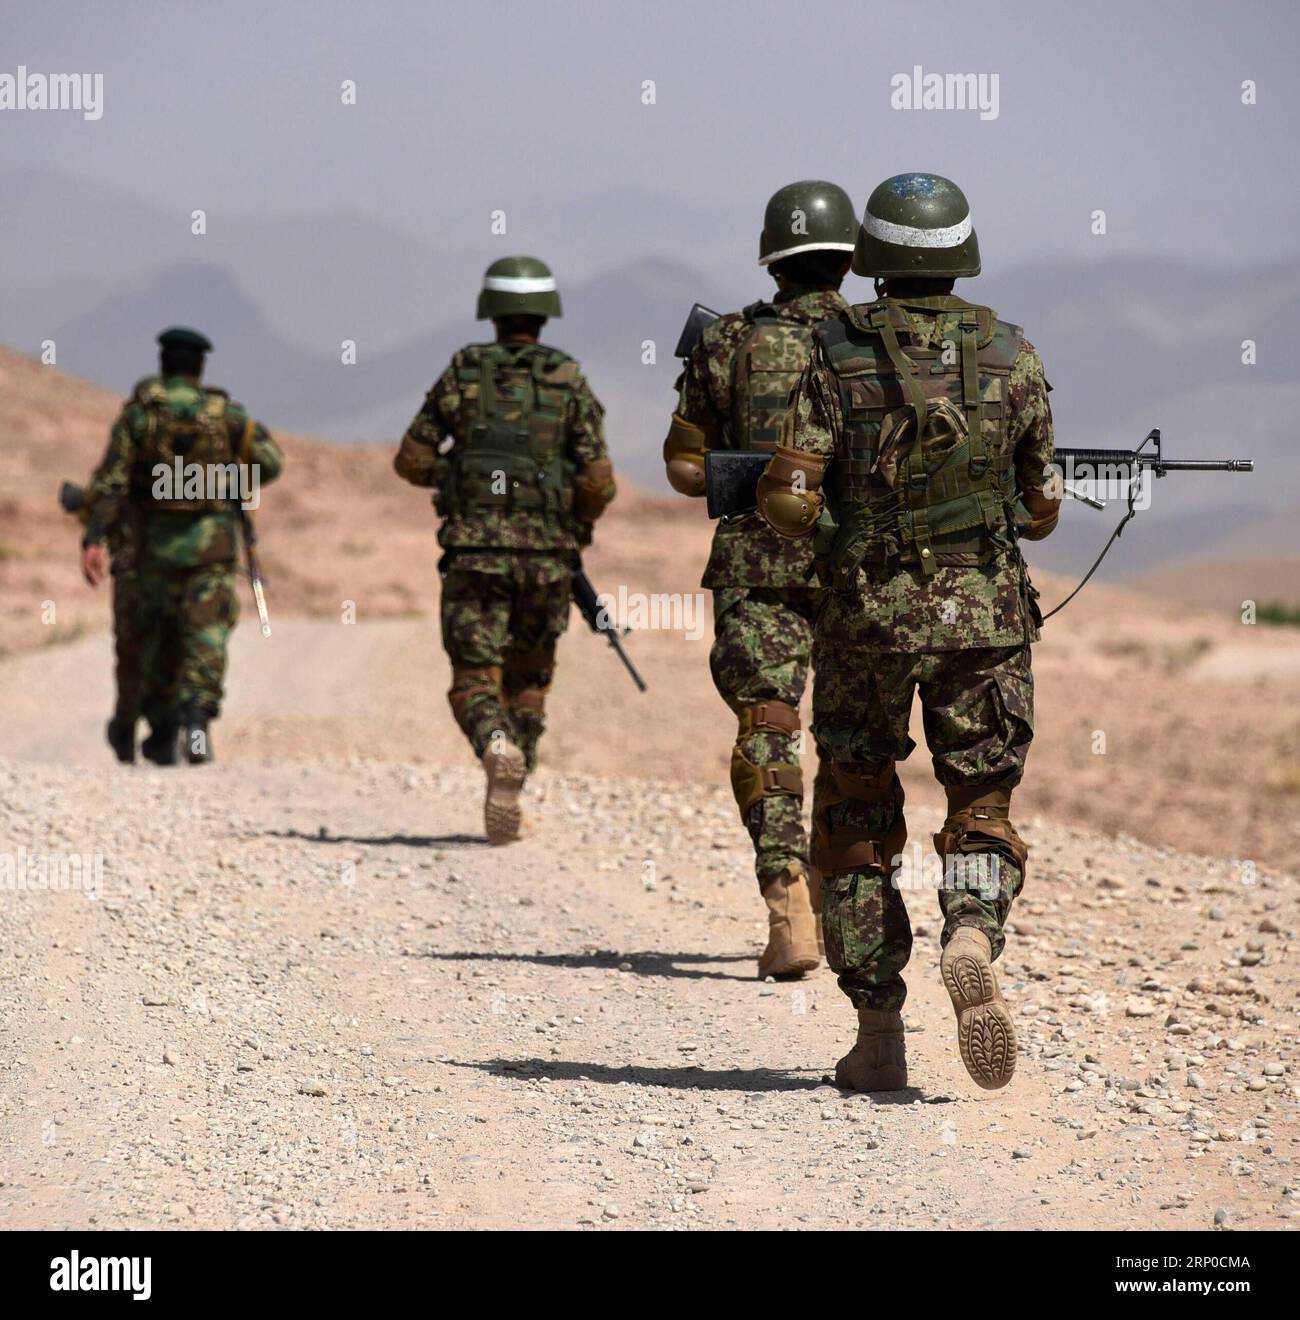 (180506) -- TIRIN KOT, May 6, 2018 -- Afghan security force members take part in a military operation in Tirin Kot, capital of Uruzgan province, Afghanistan, May 5, 2018. ) (wtc) AFGHANISTAN-URUZGAN-MILITARY OPERATION SanaullahxSeiam PUBLICATIONxNOTxINxCHN Stock Photo